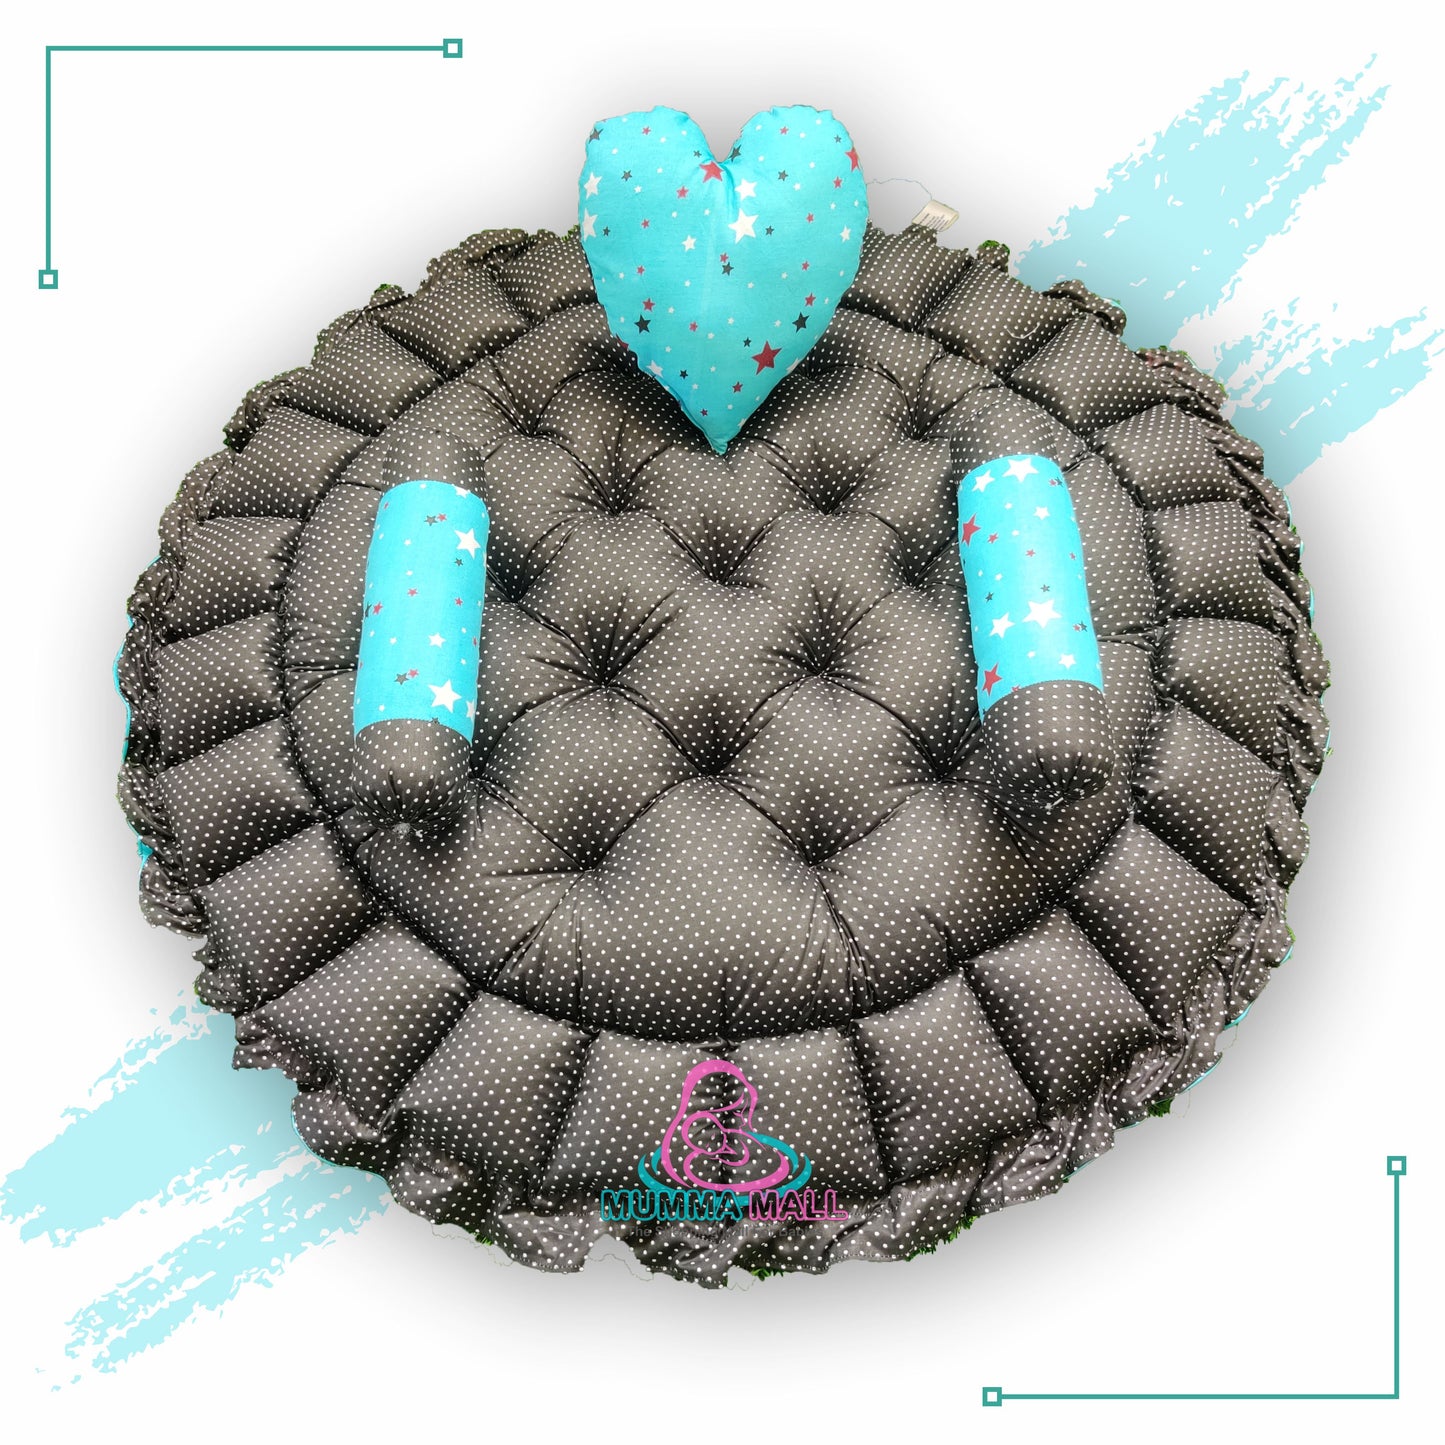 Round baby tub bed with a heart pillow and pair of Bolster (Turquoise and Black)